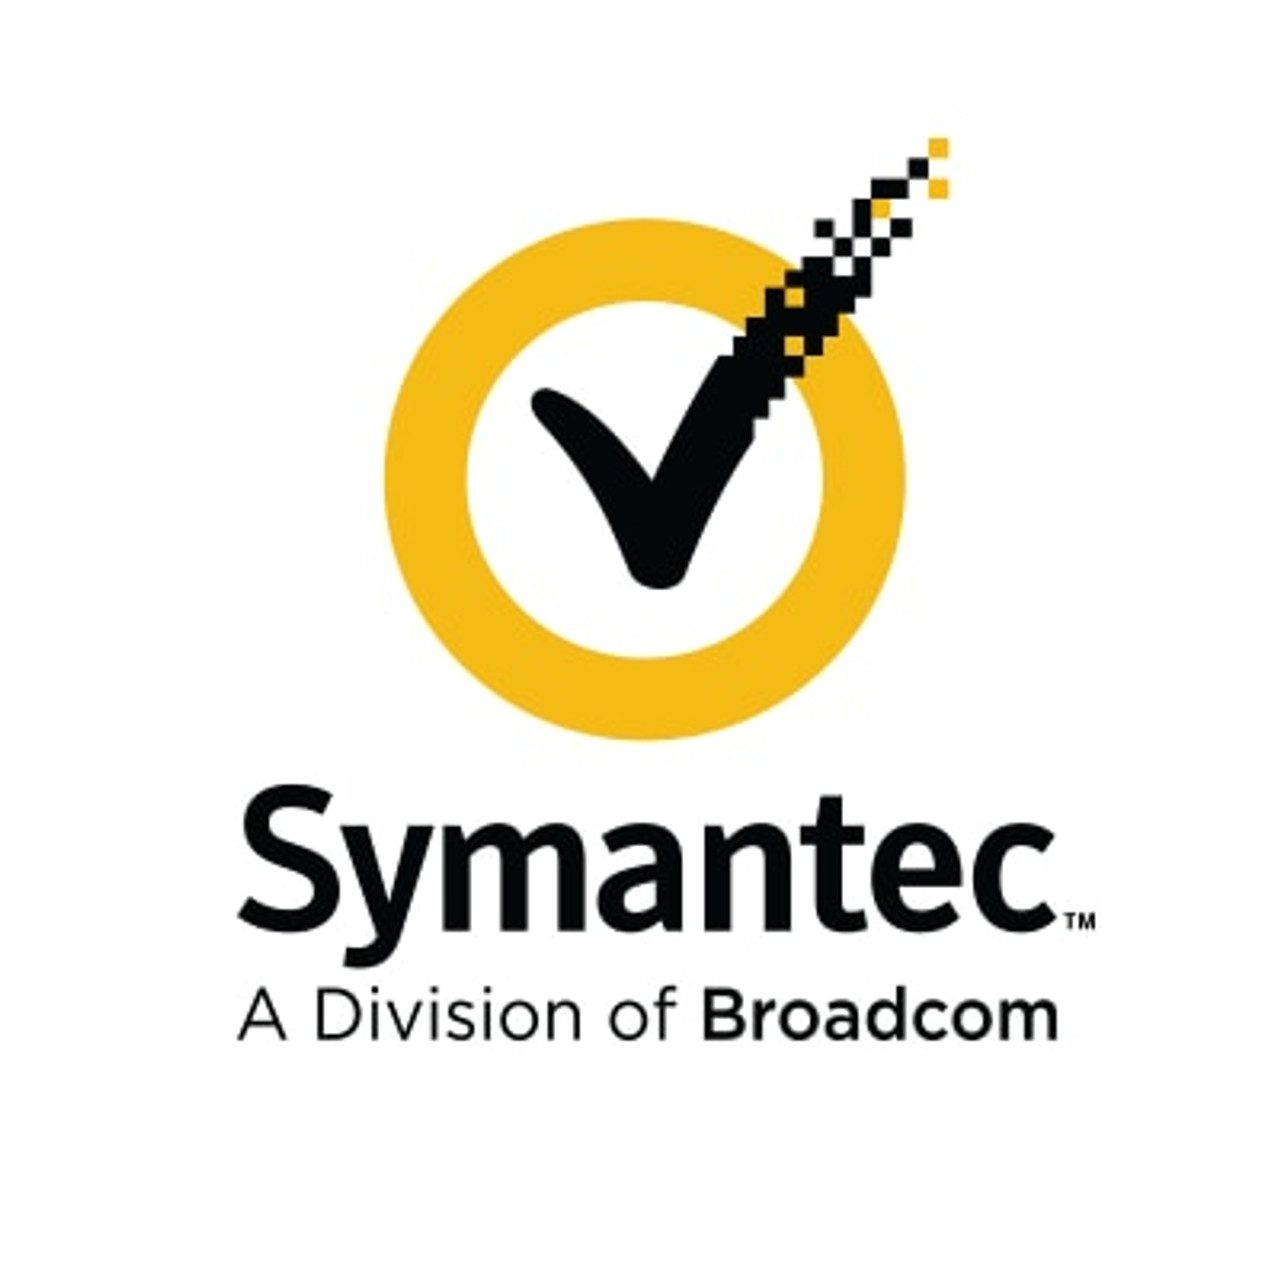 Symantec Complete Endpoint Defense (with SEP), Initial Hybrid Subscription License with Support, 500-999 Devices 1 YR